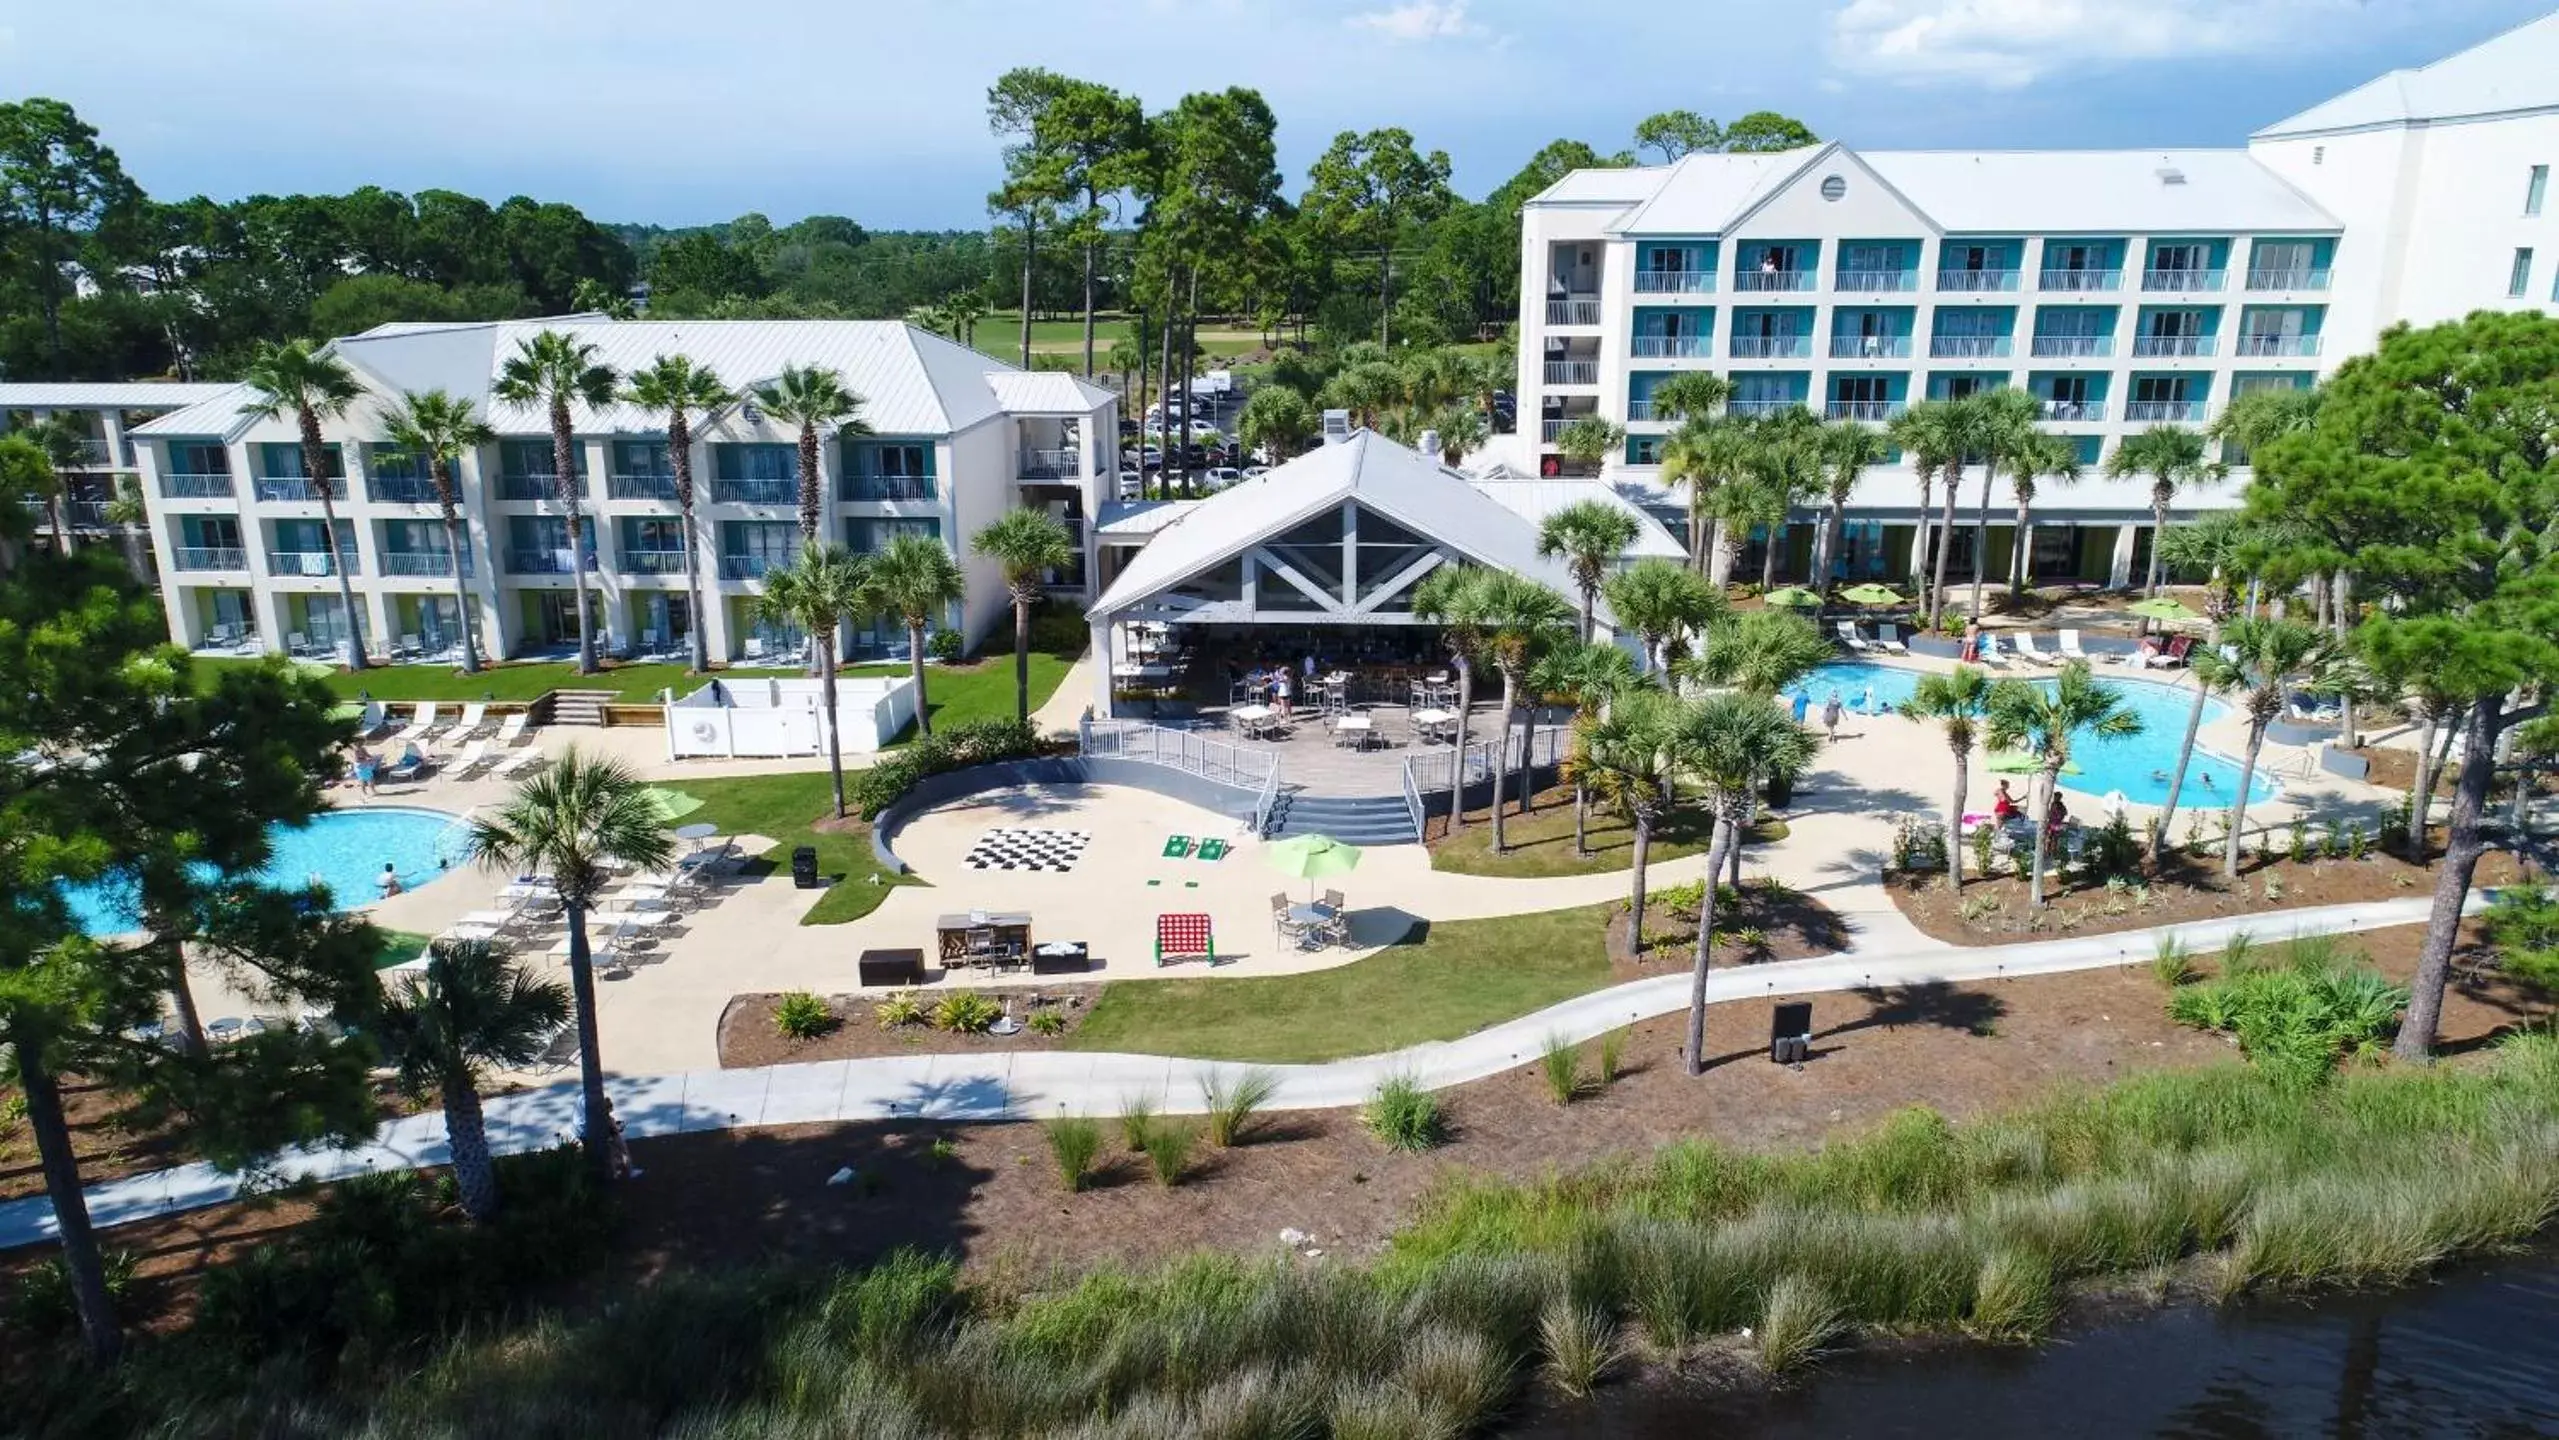 Property building, Bird's-eye View in Bluegreen's Bayside Resort and Spa at Panama City Beach